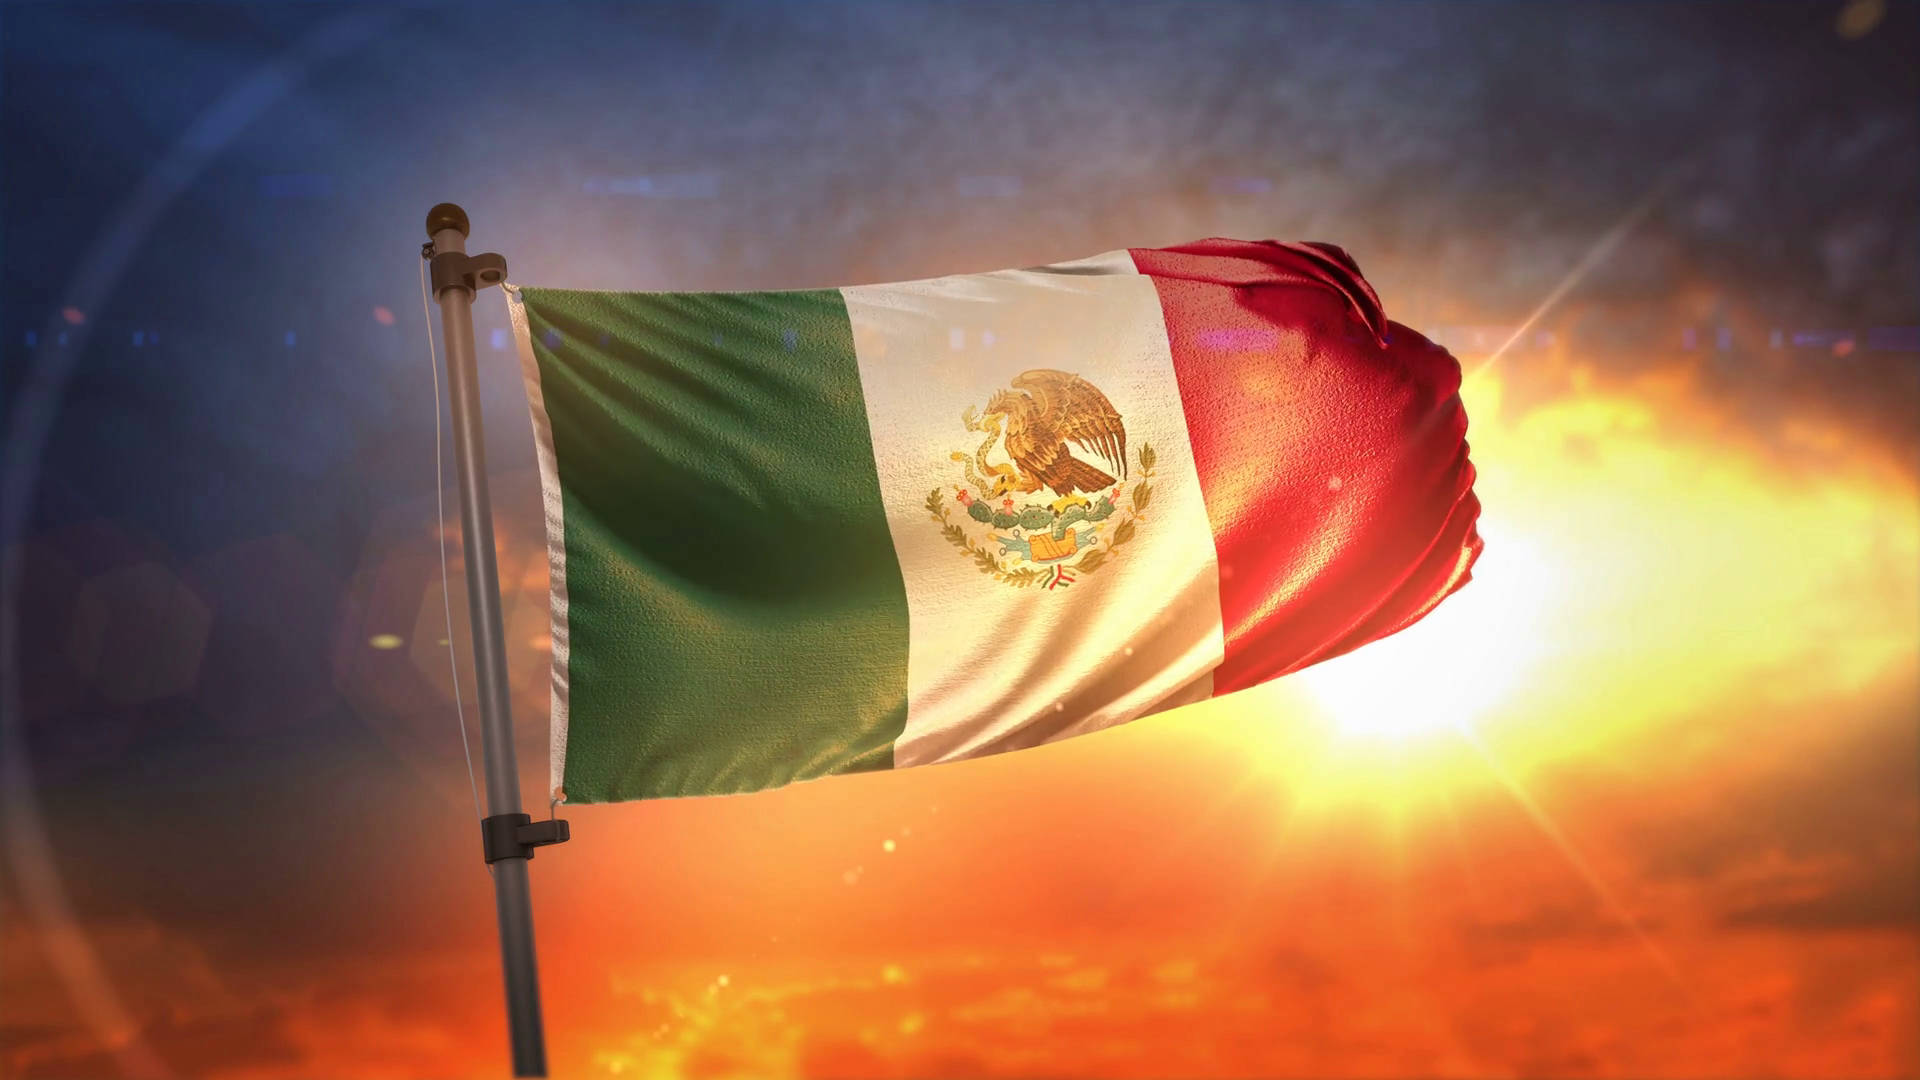 Blazing Sun Behind The Mexico Flag Background